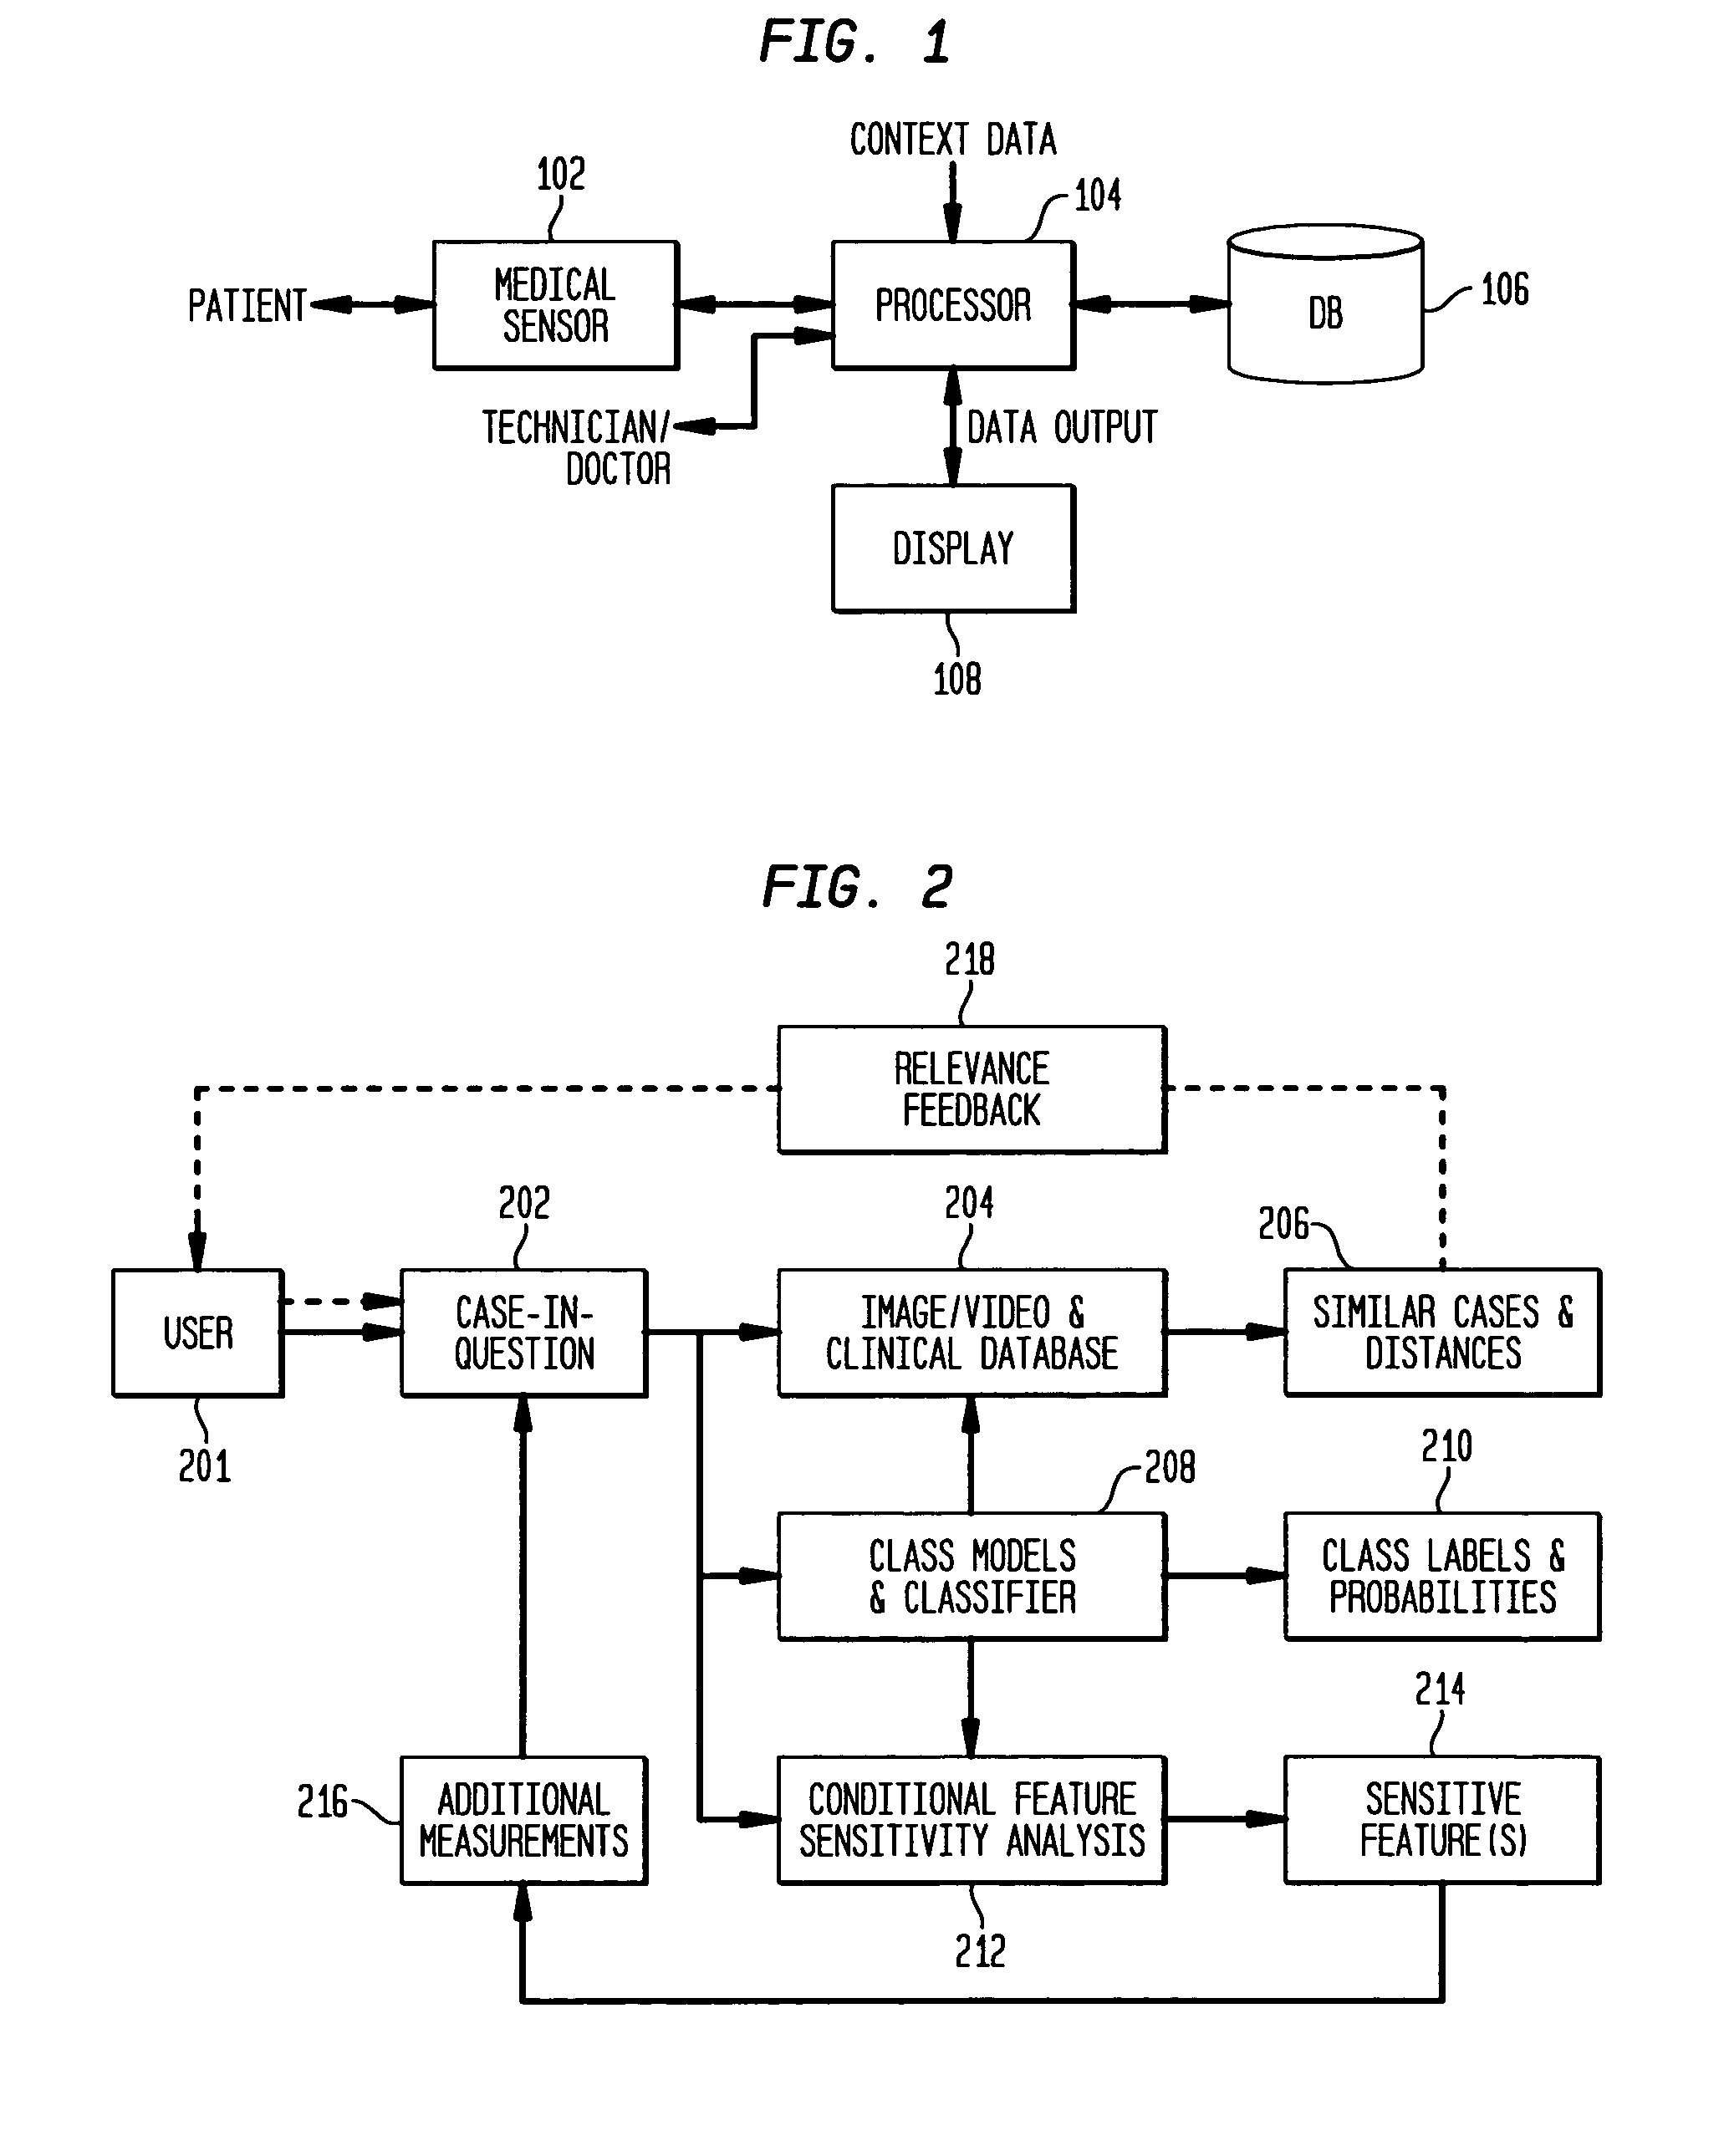 System and method for performing probabilistic classification and decision support using multidimensional medical image databases